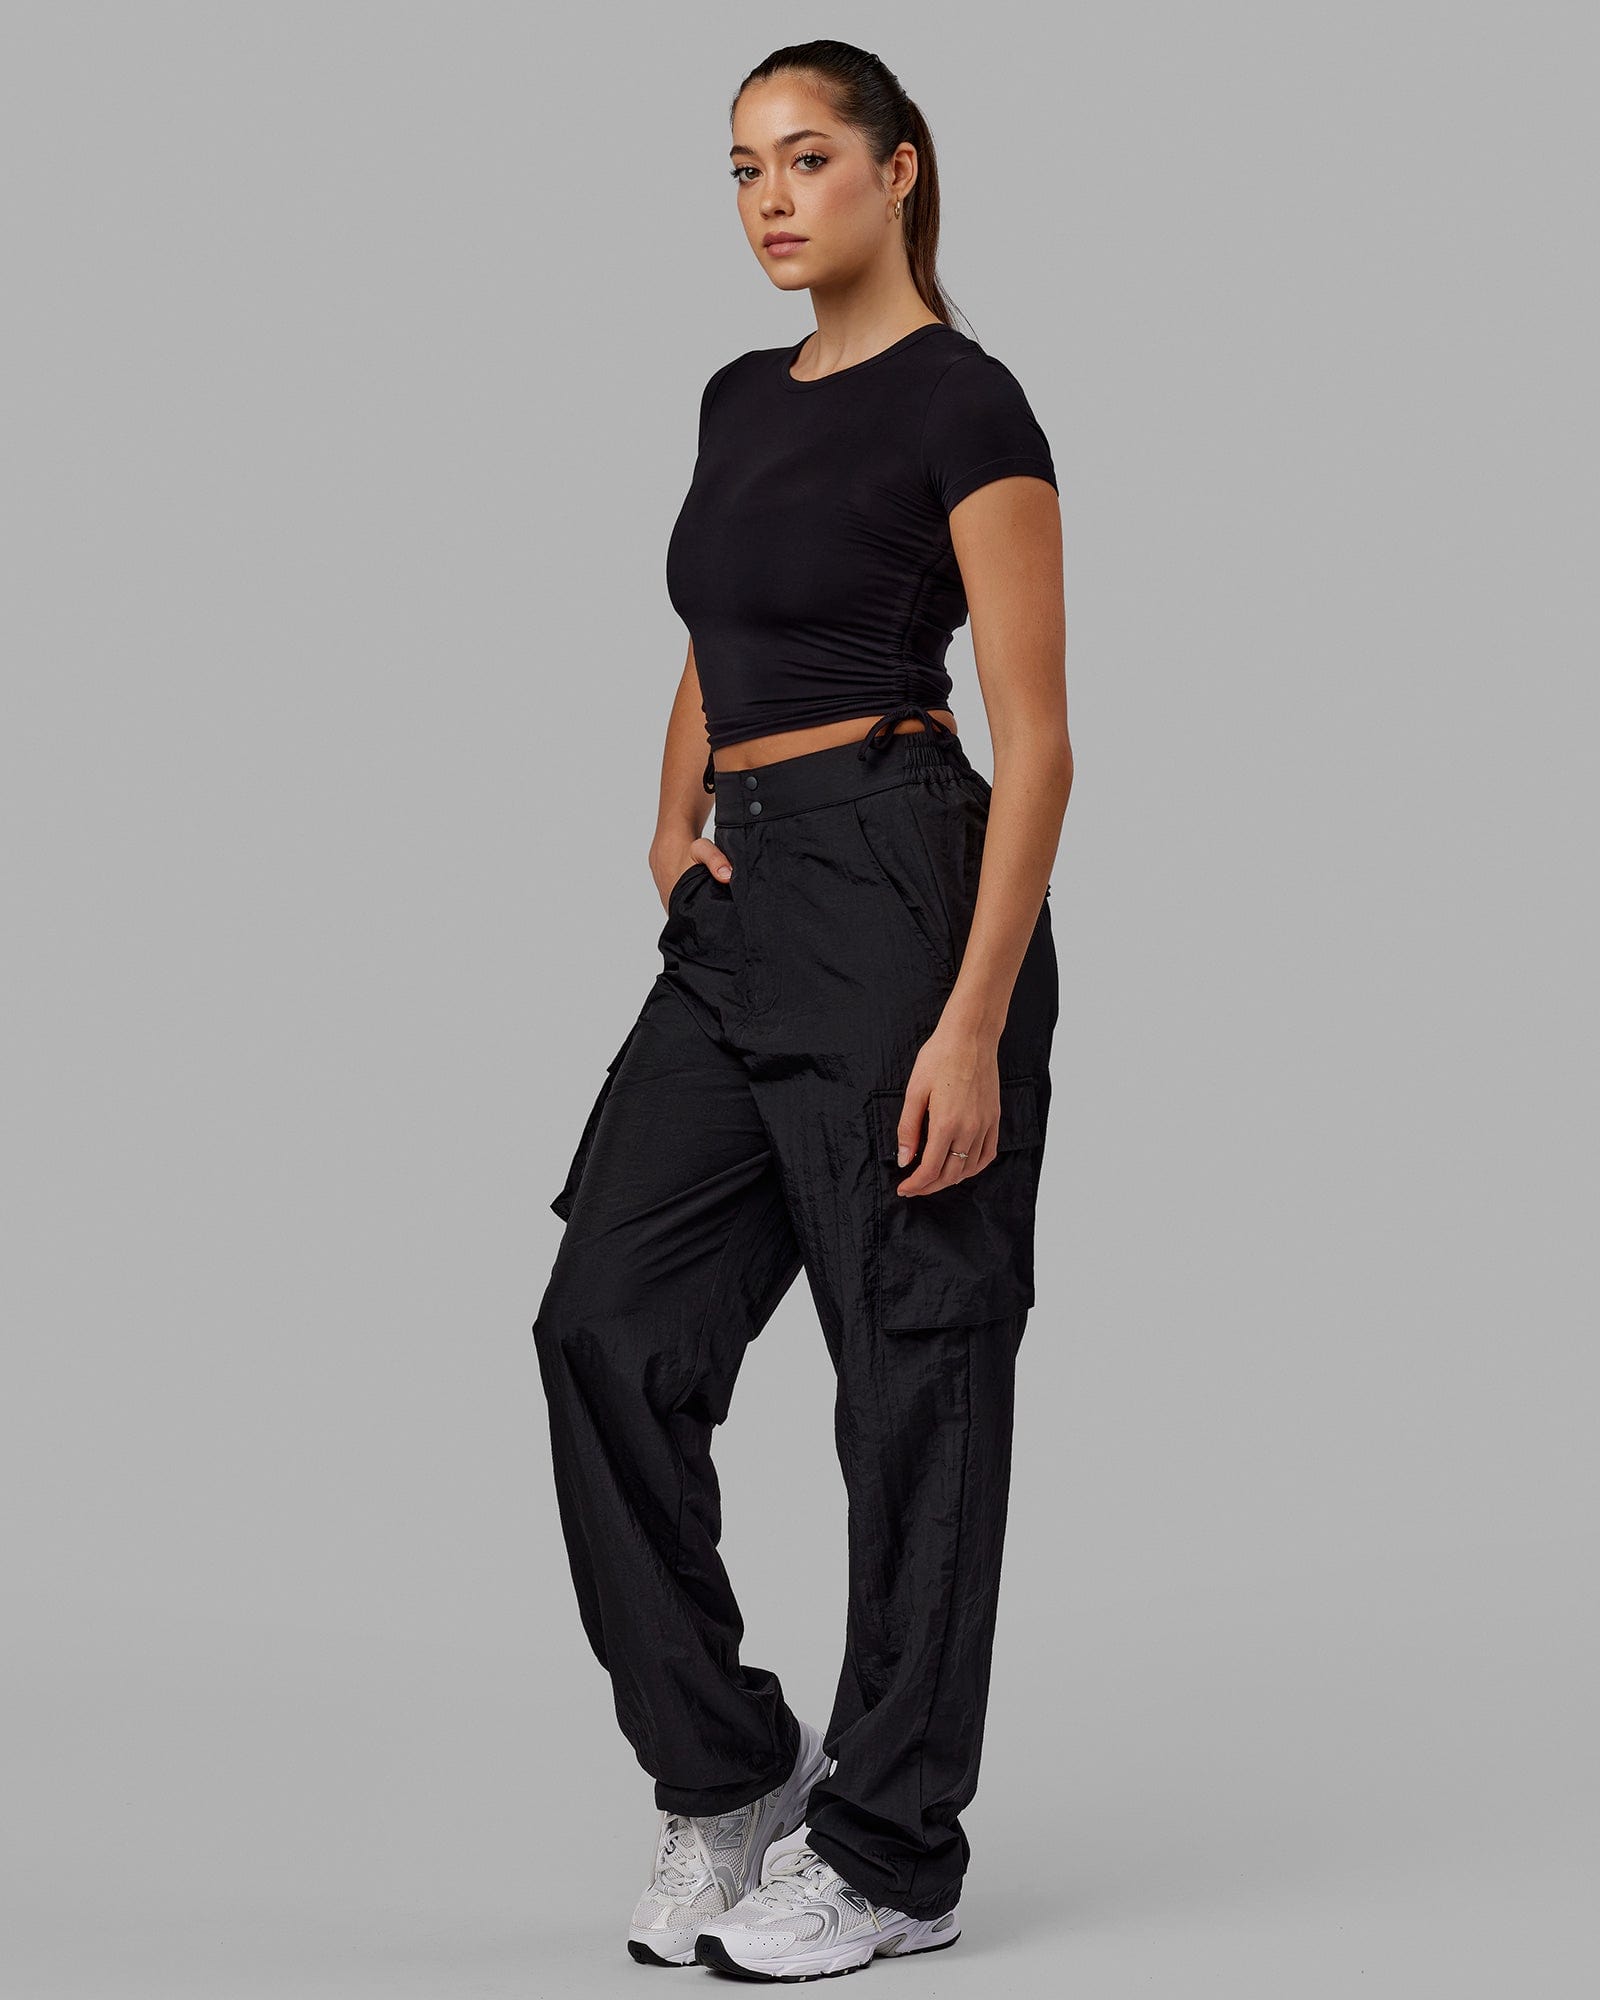 Buy JEAAMKSSER Womens High Waisted Black Cargo Pants with Pockets Baggy  Solid Y2k Streetwear Pants, Black-214, X-Large at Amazon.in